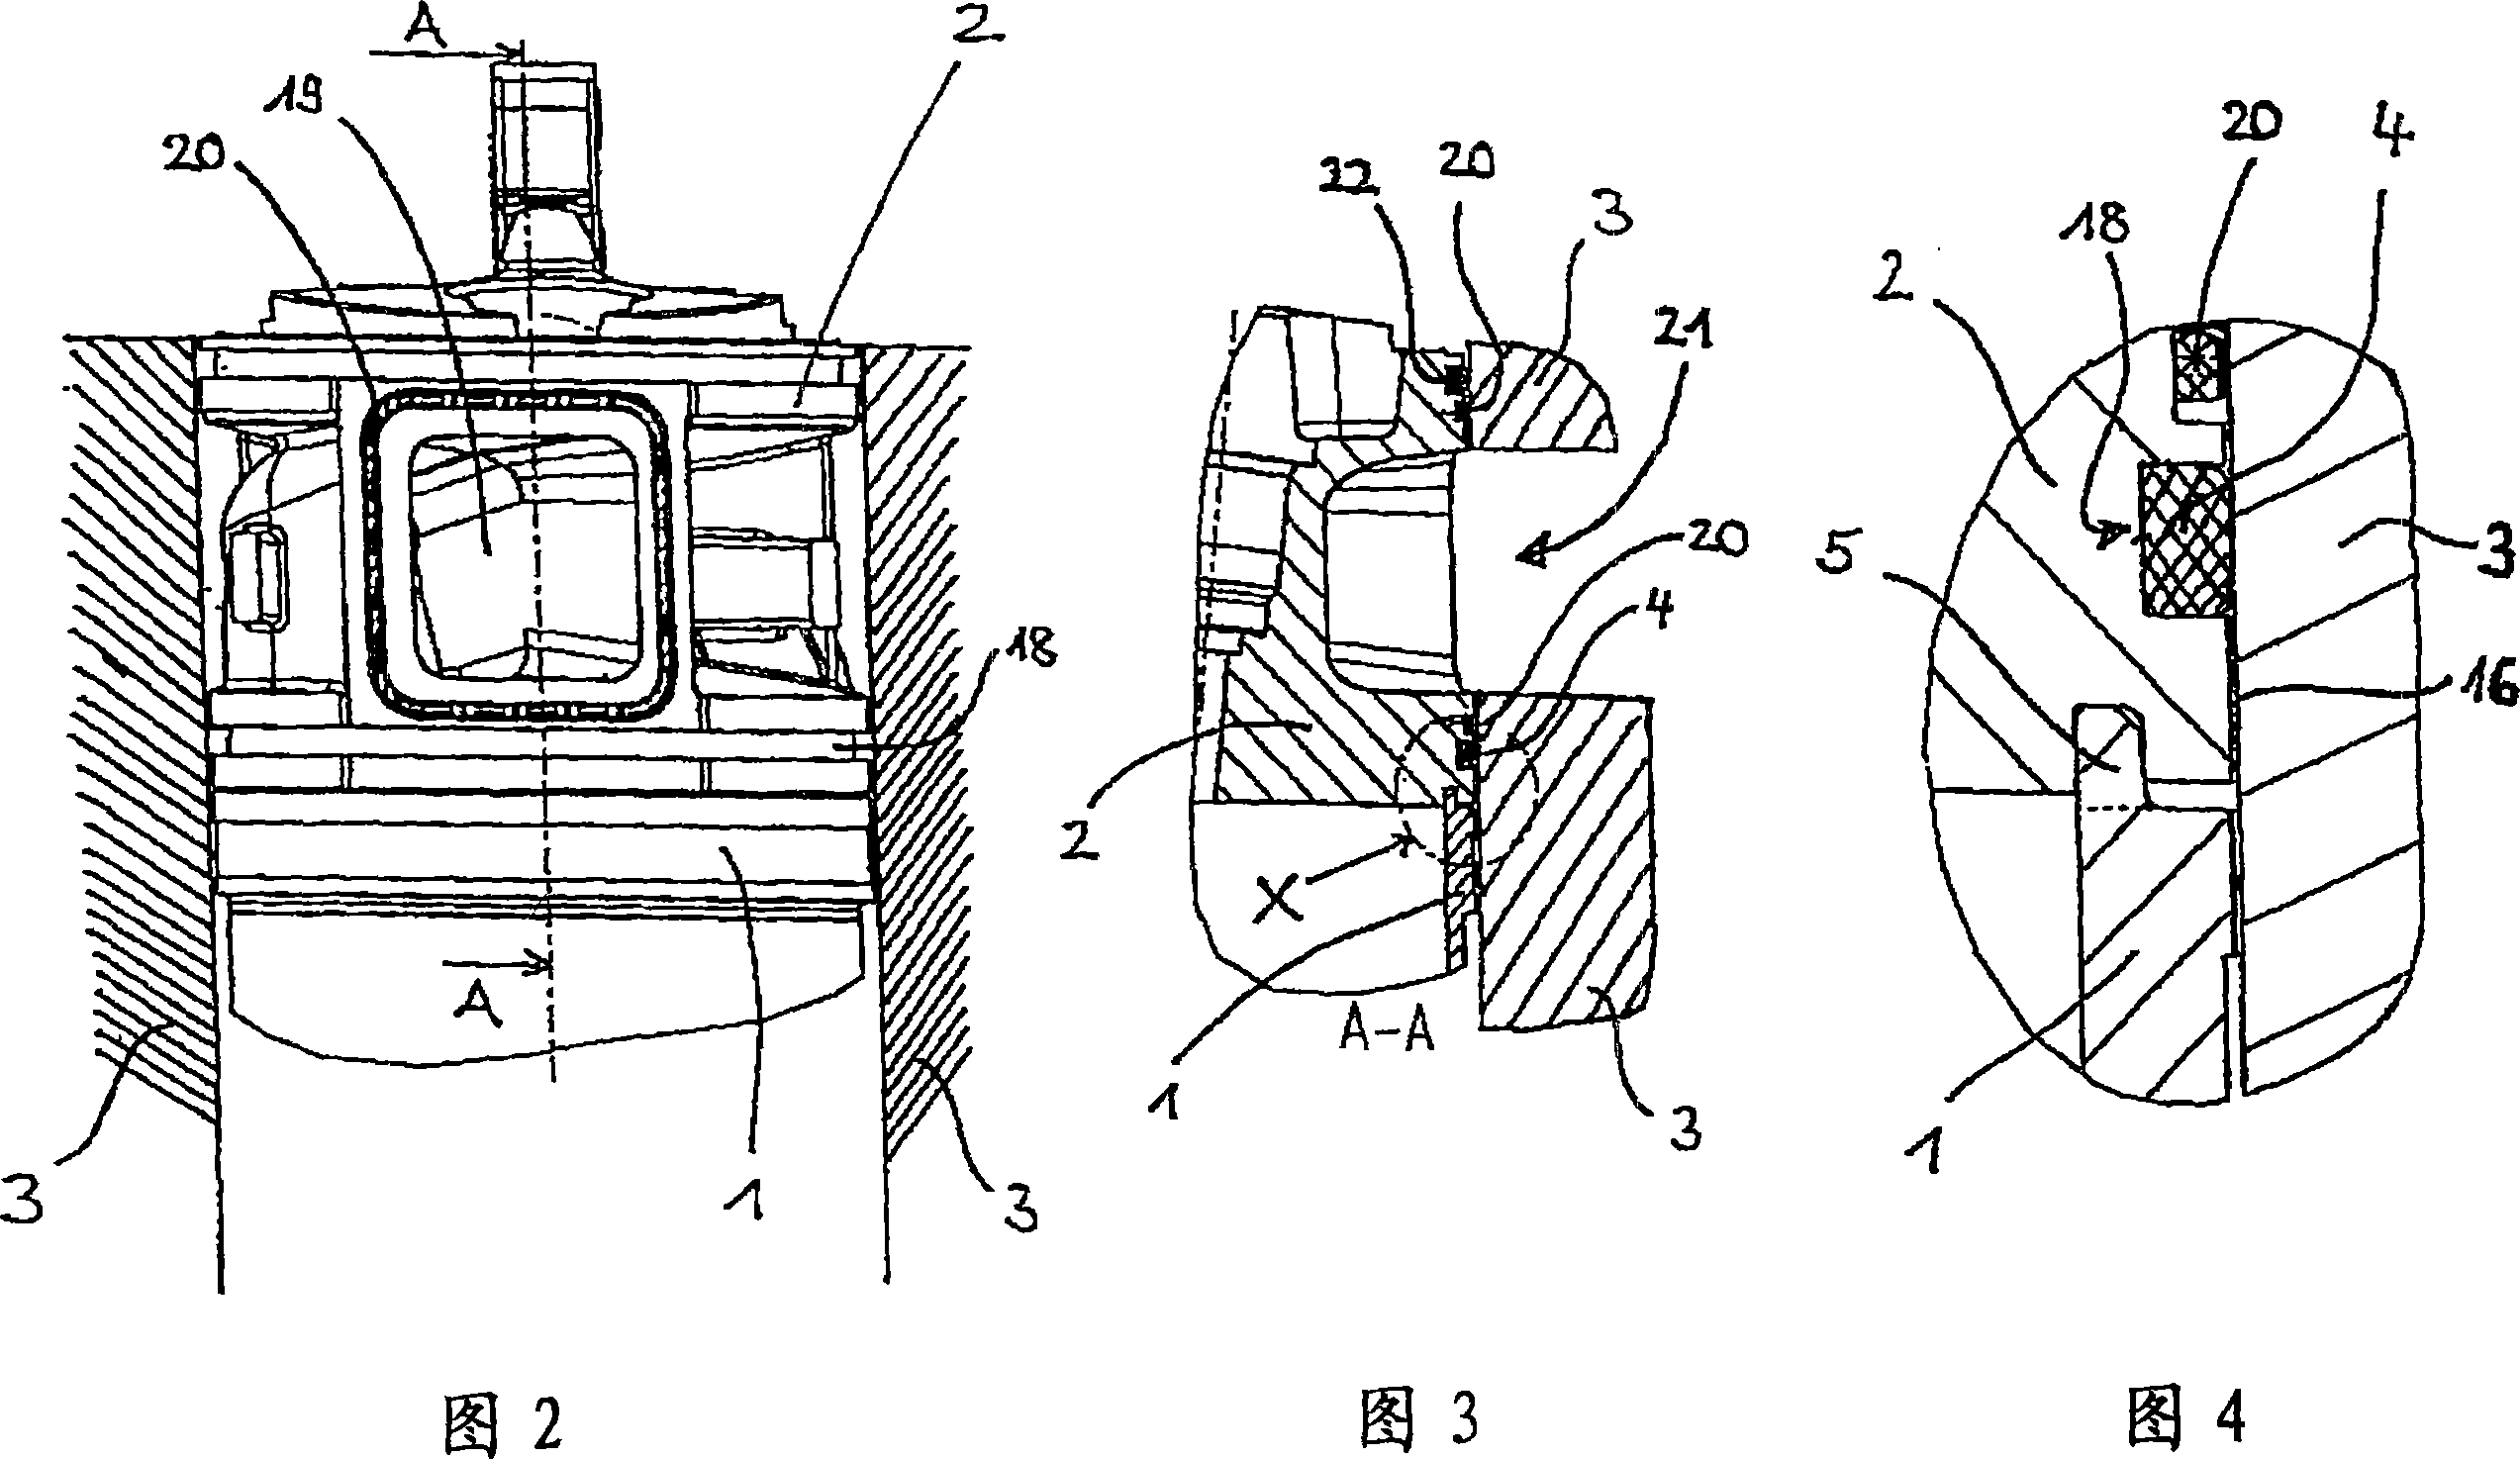 Sealing system for an internal combustion engine with a divided casting enclosure